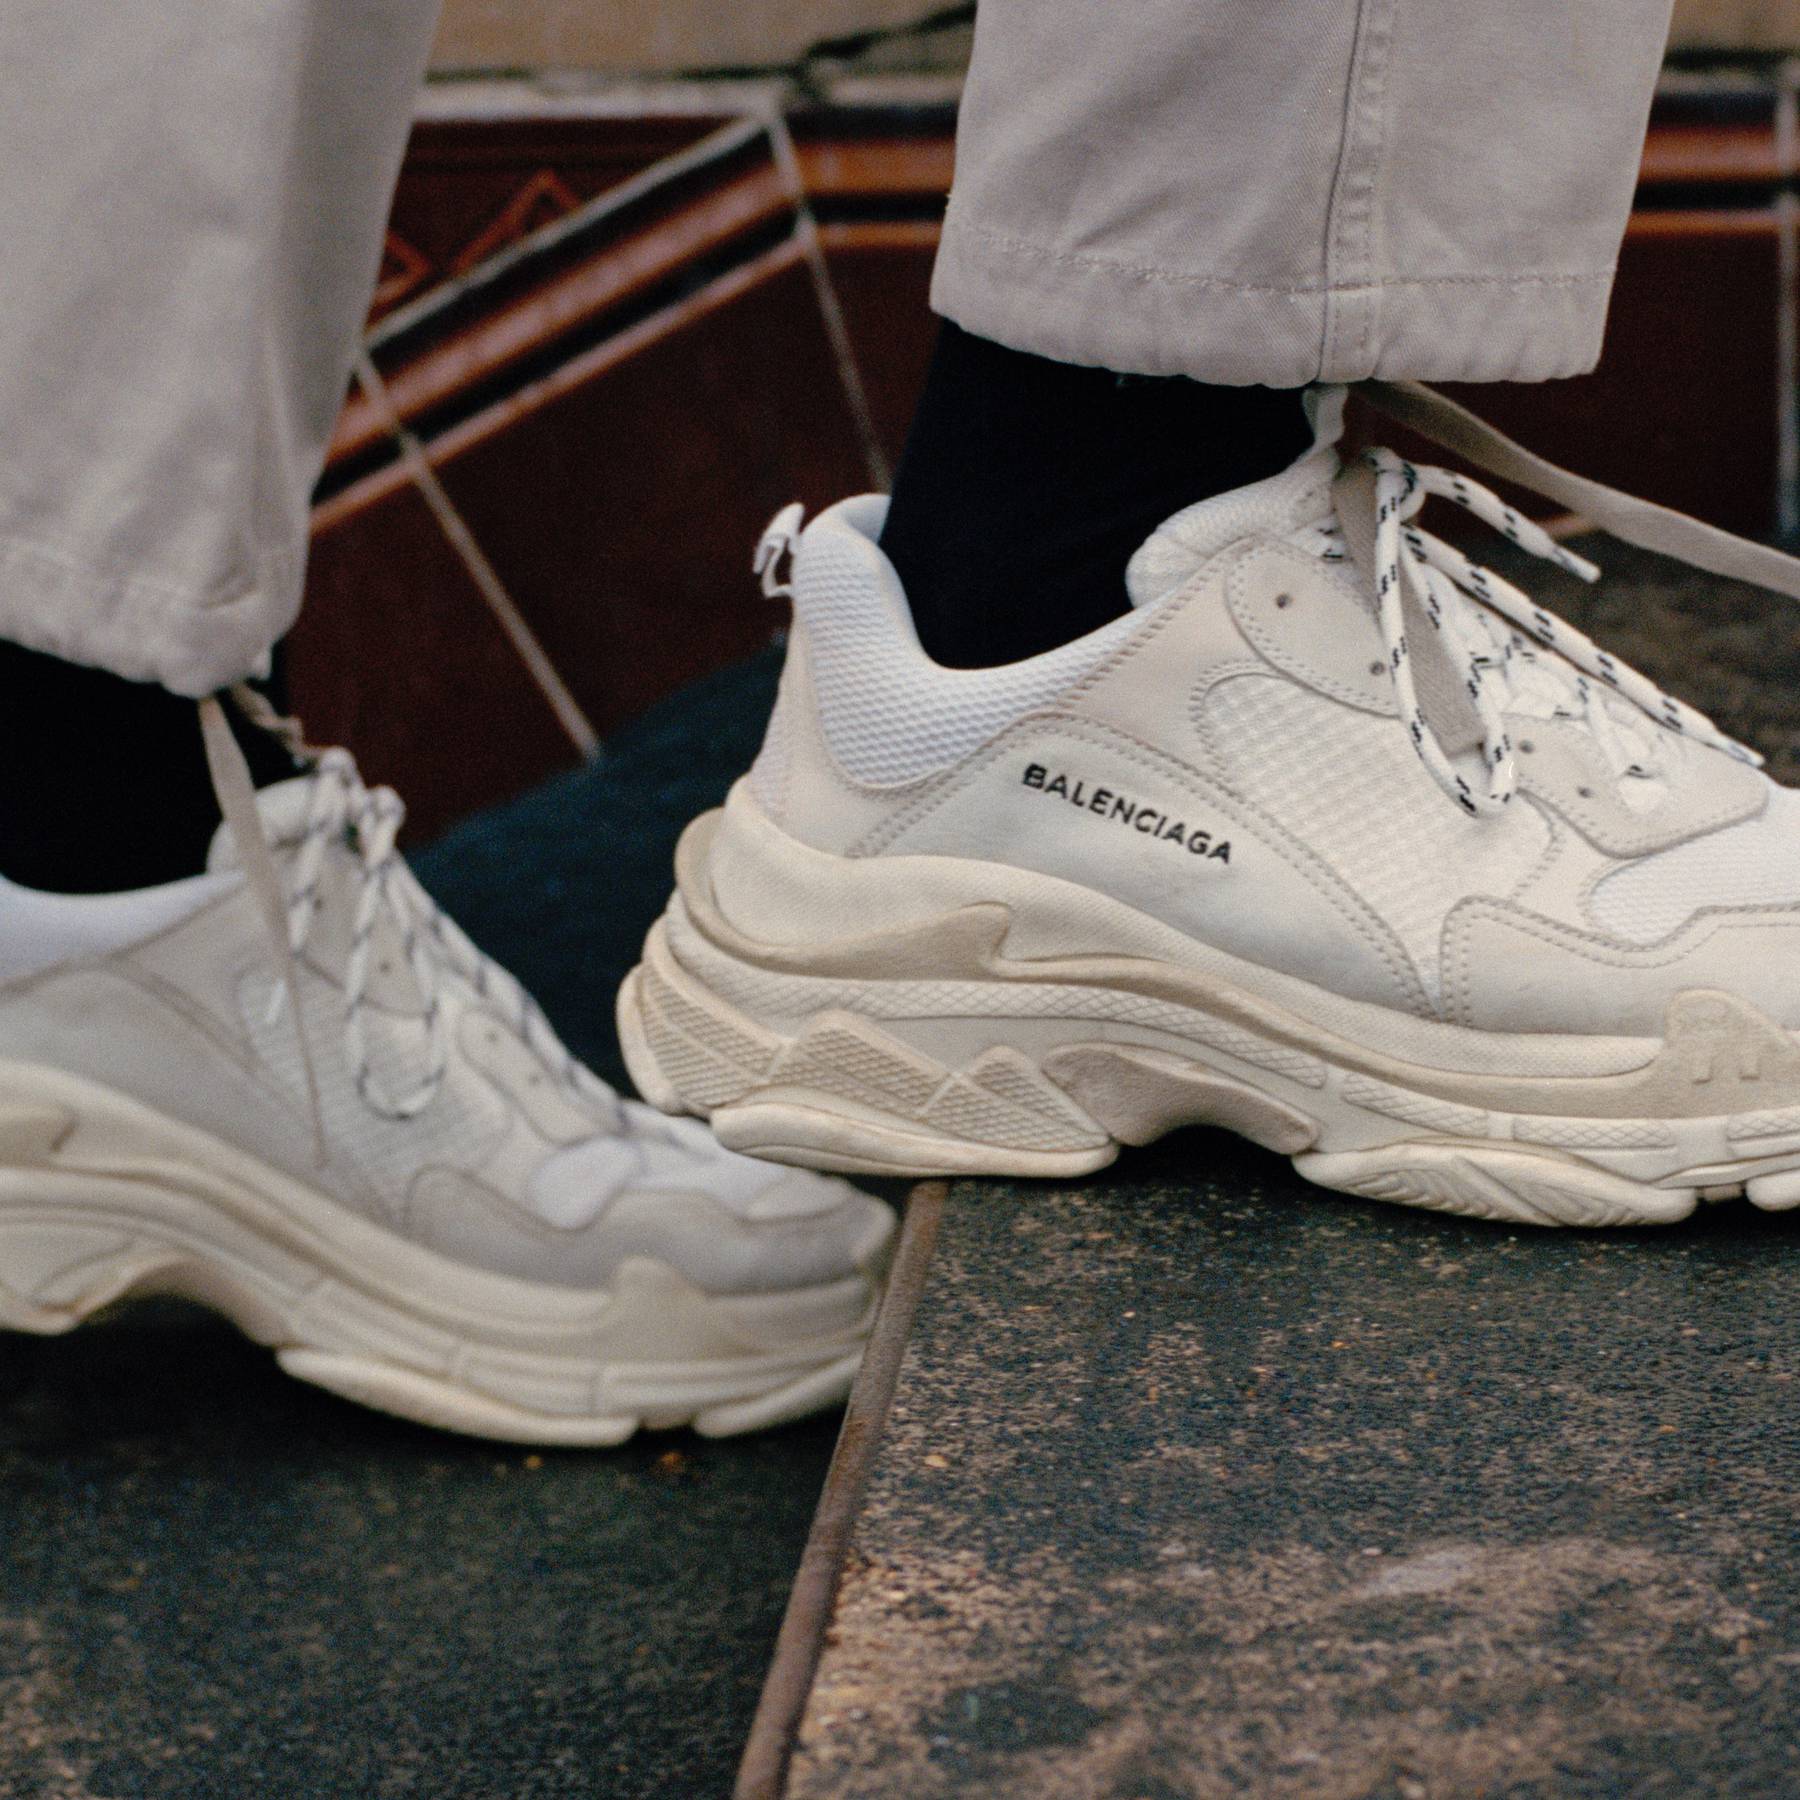 Style Trend Report: The Ugly Sneakers